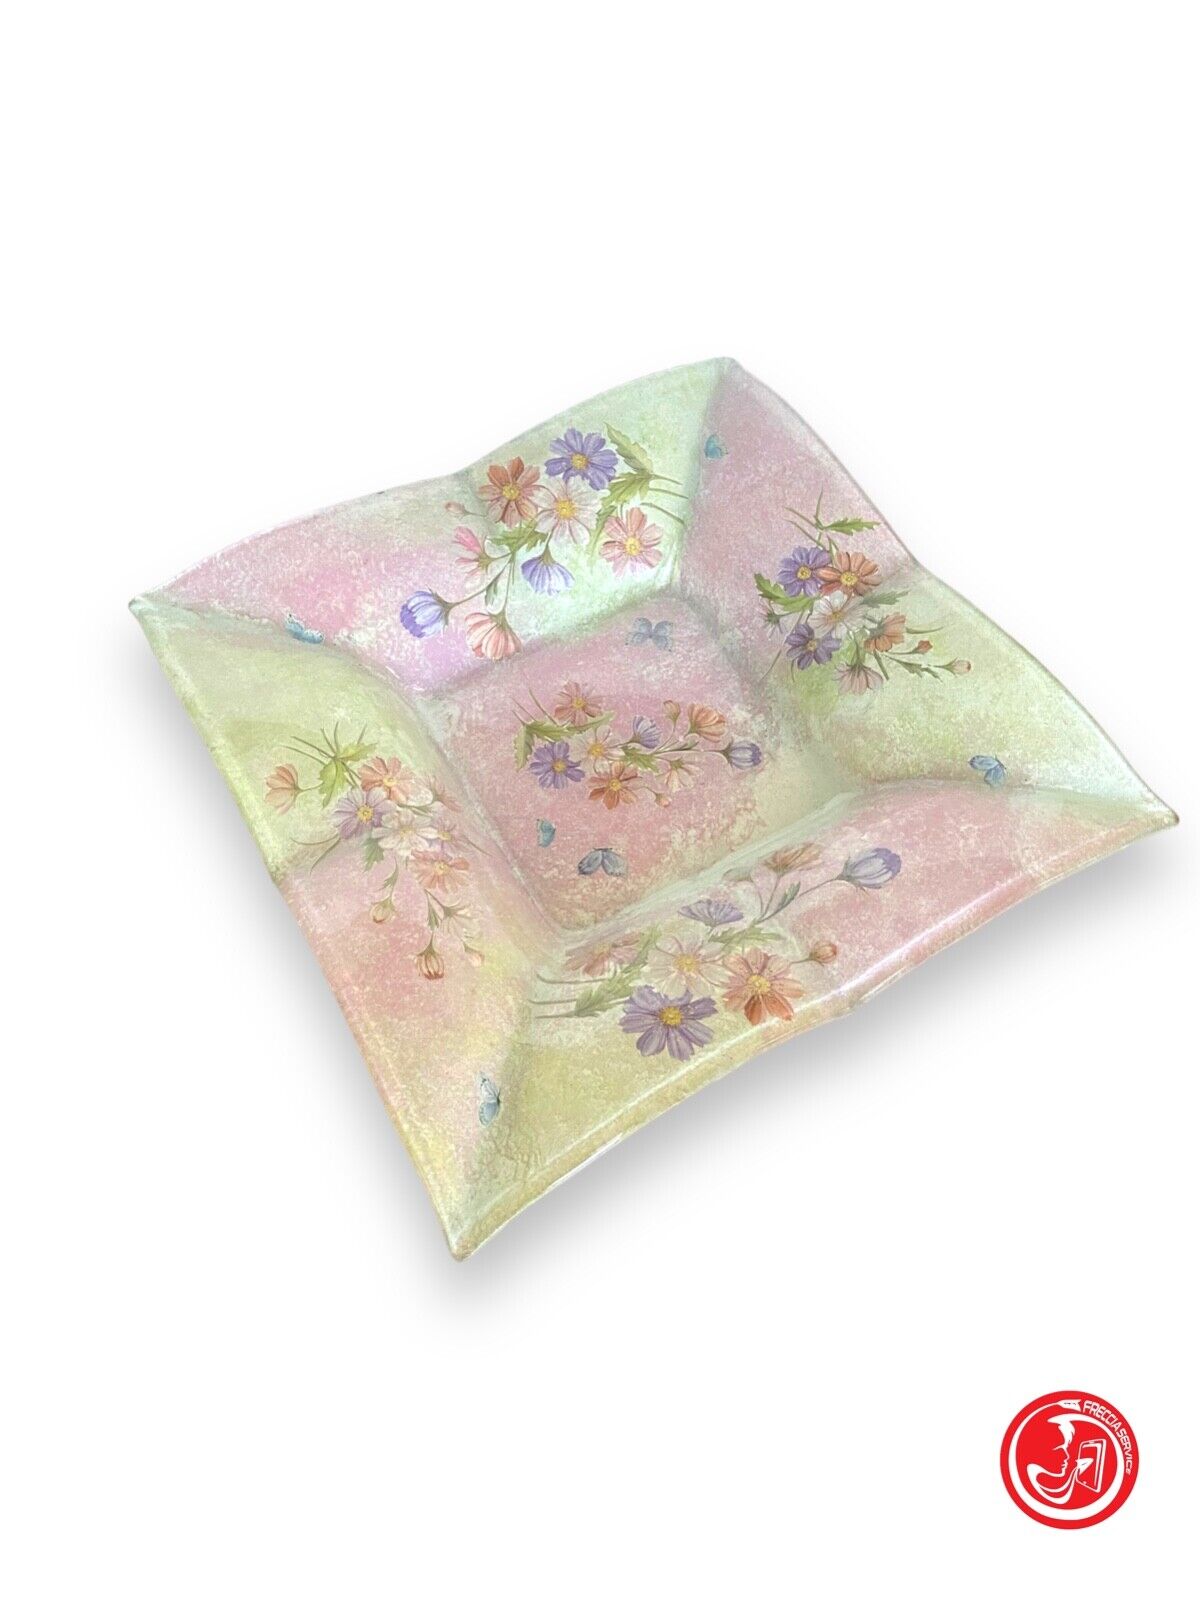 Glass tray with decoupage decorations 